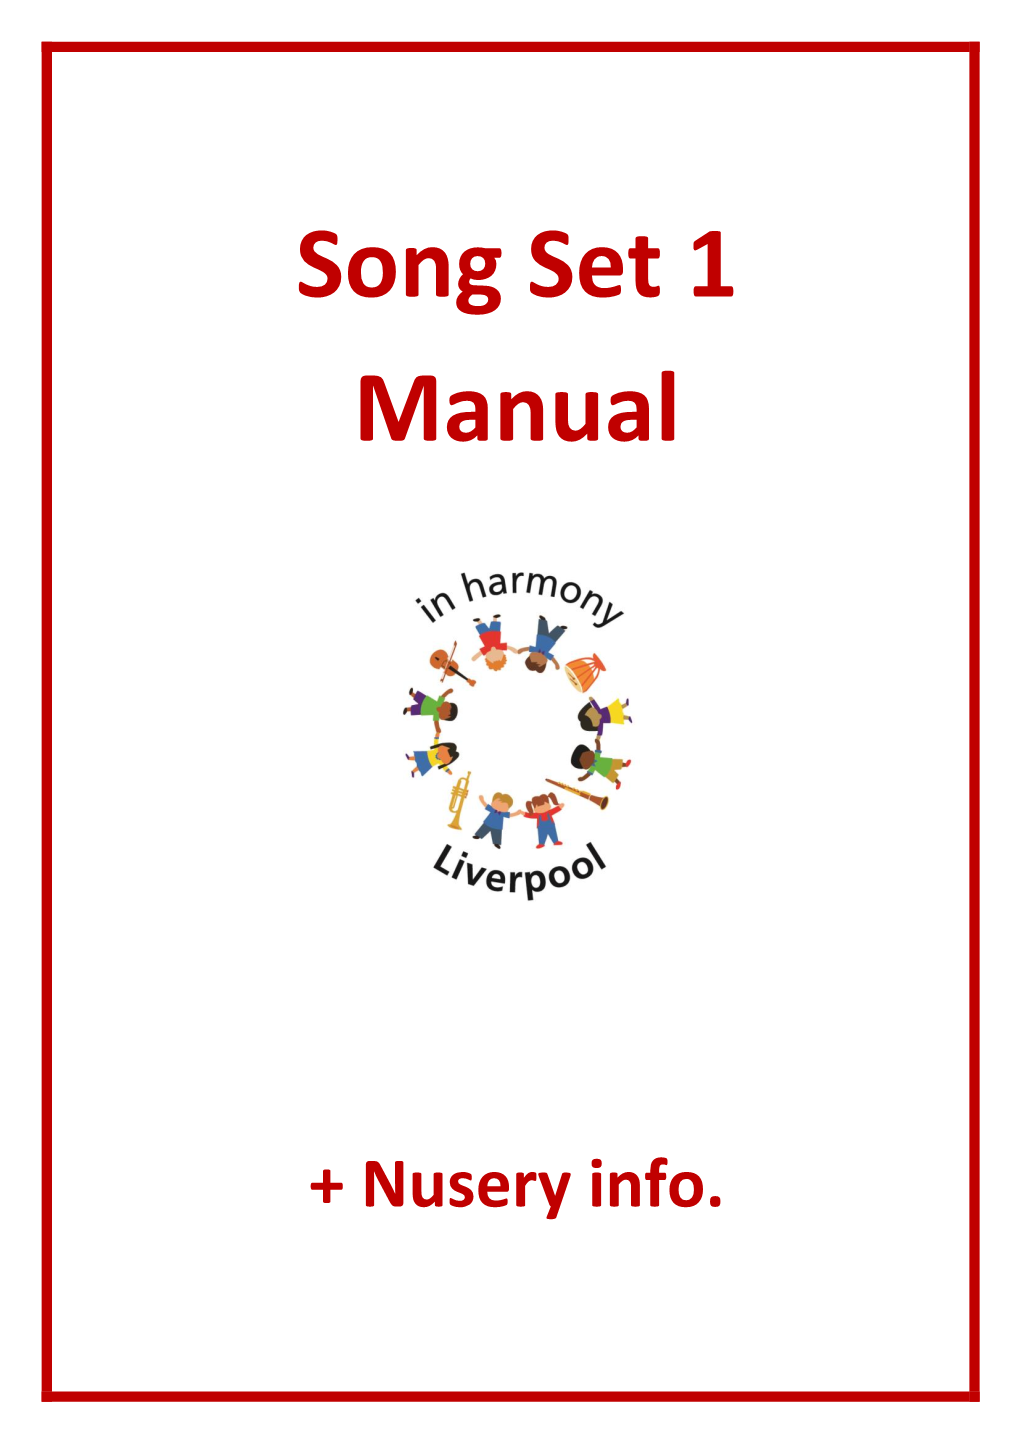 Song Set 1 Manual and Nursery Info